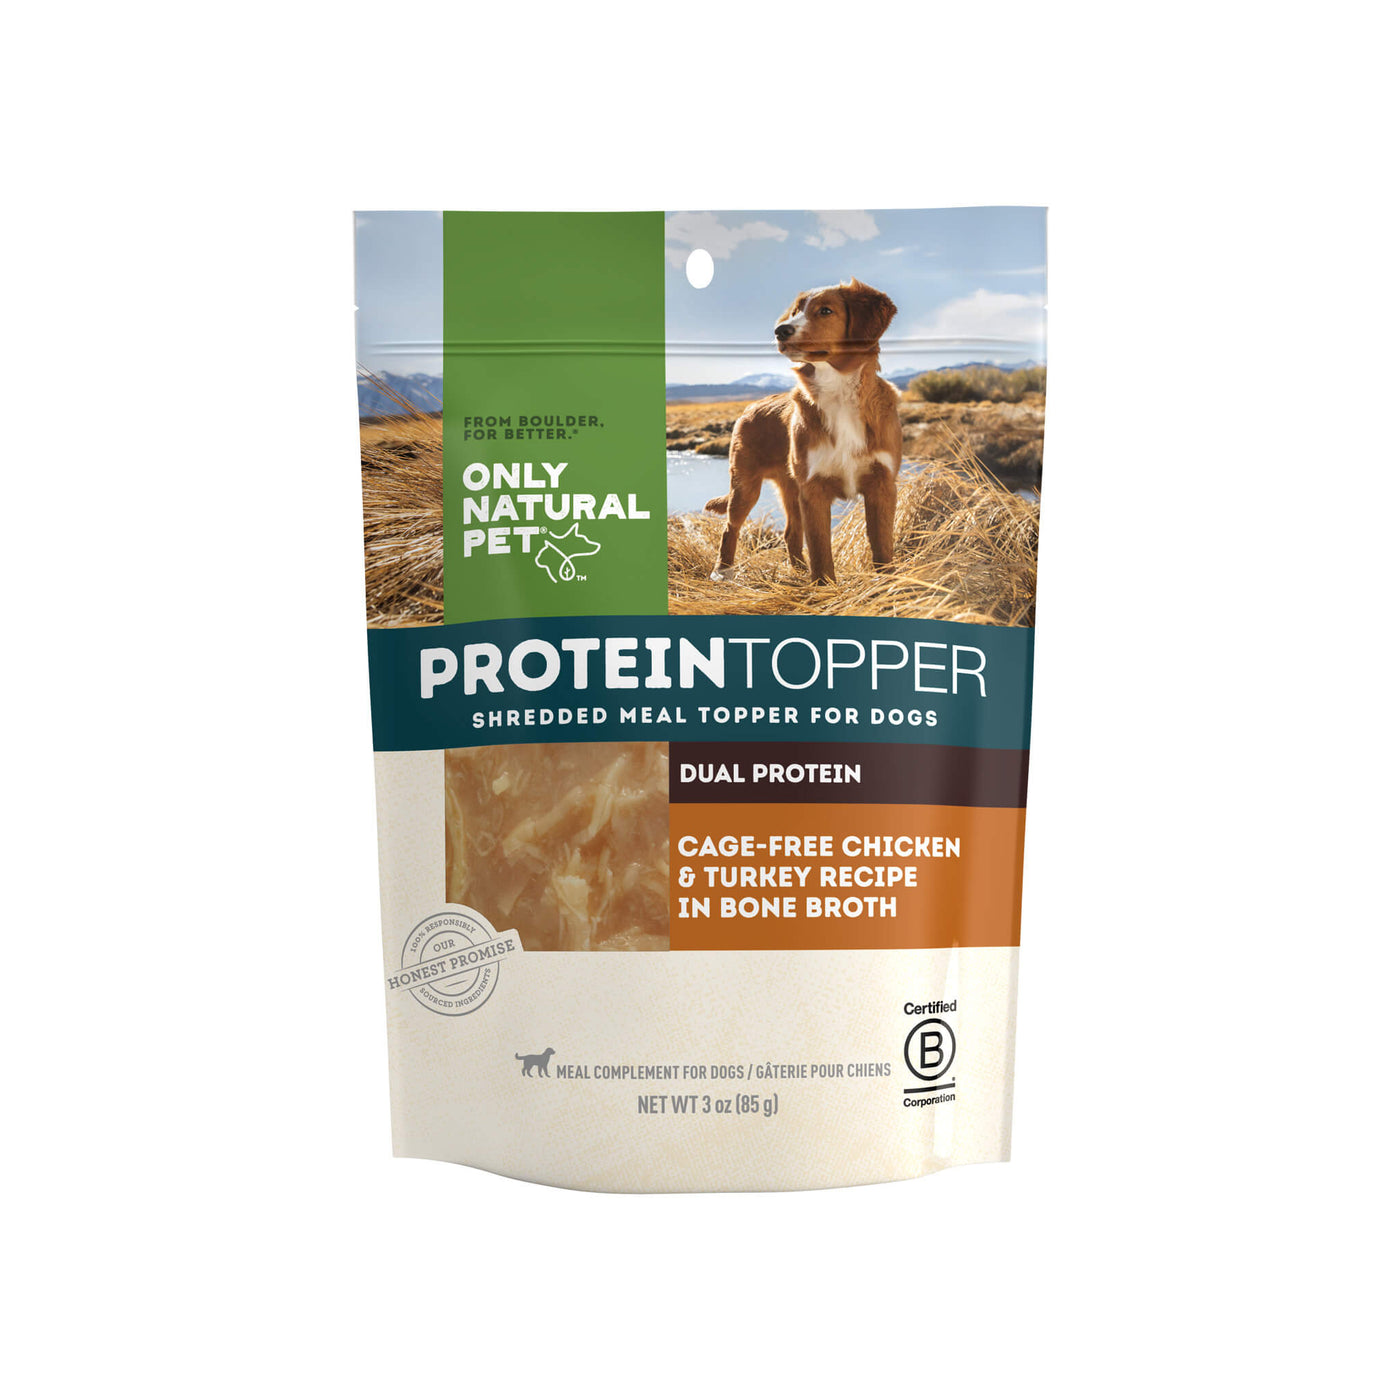 how many grams of protein does a dog need